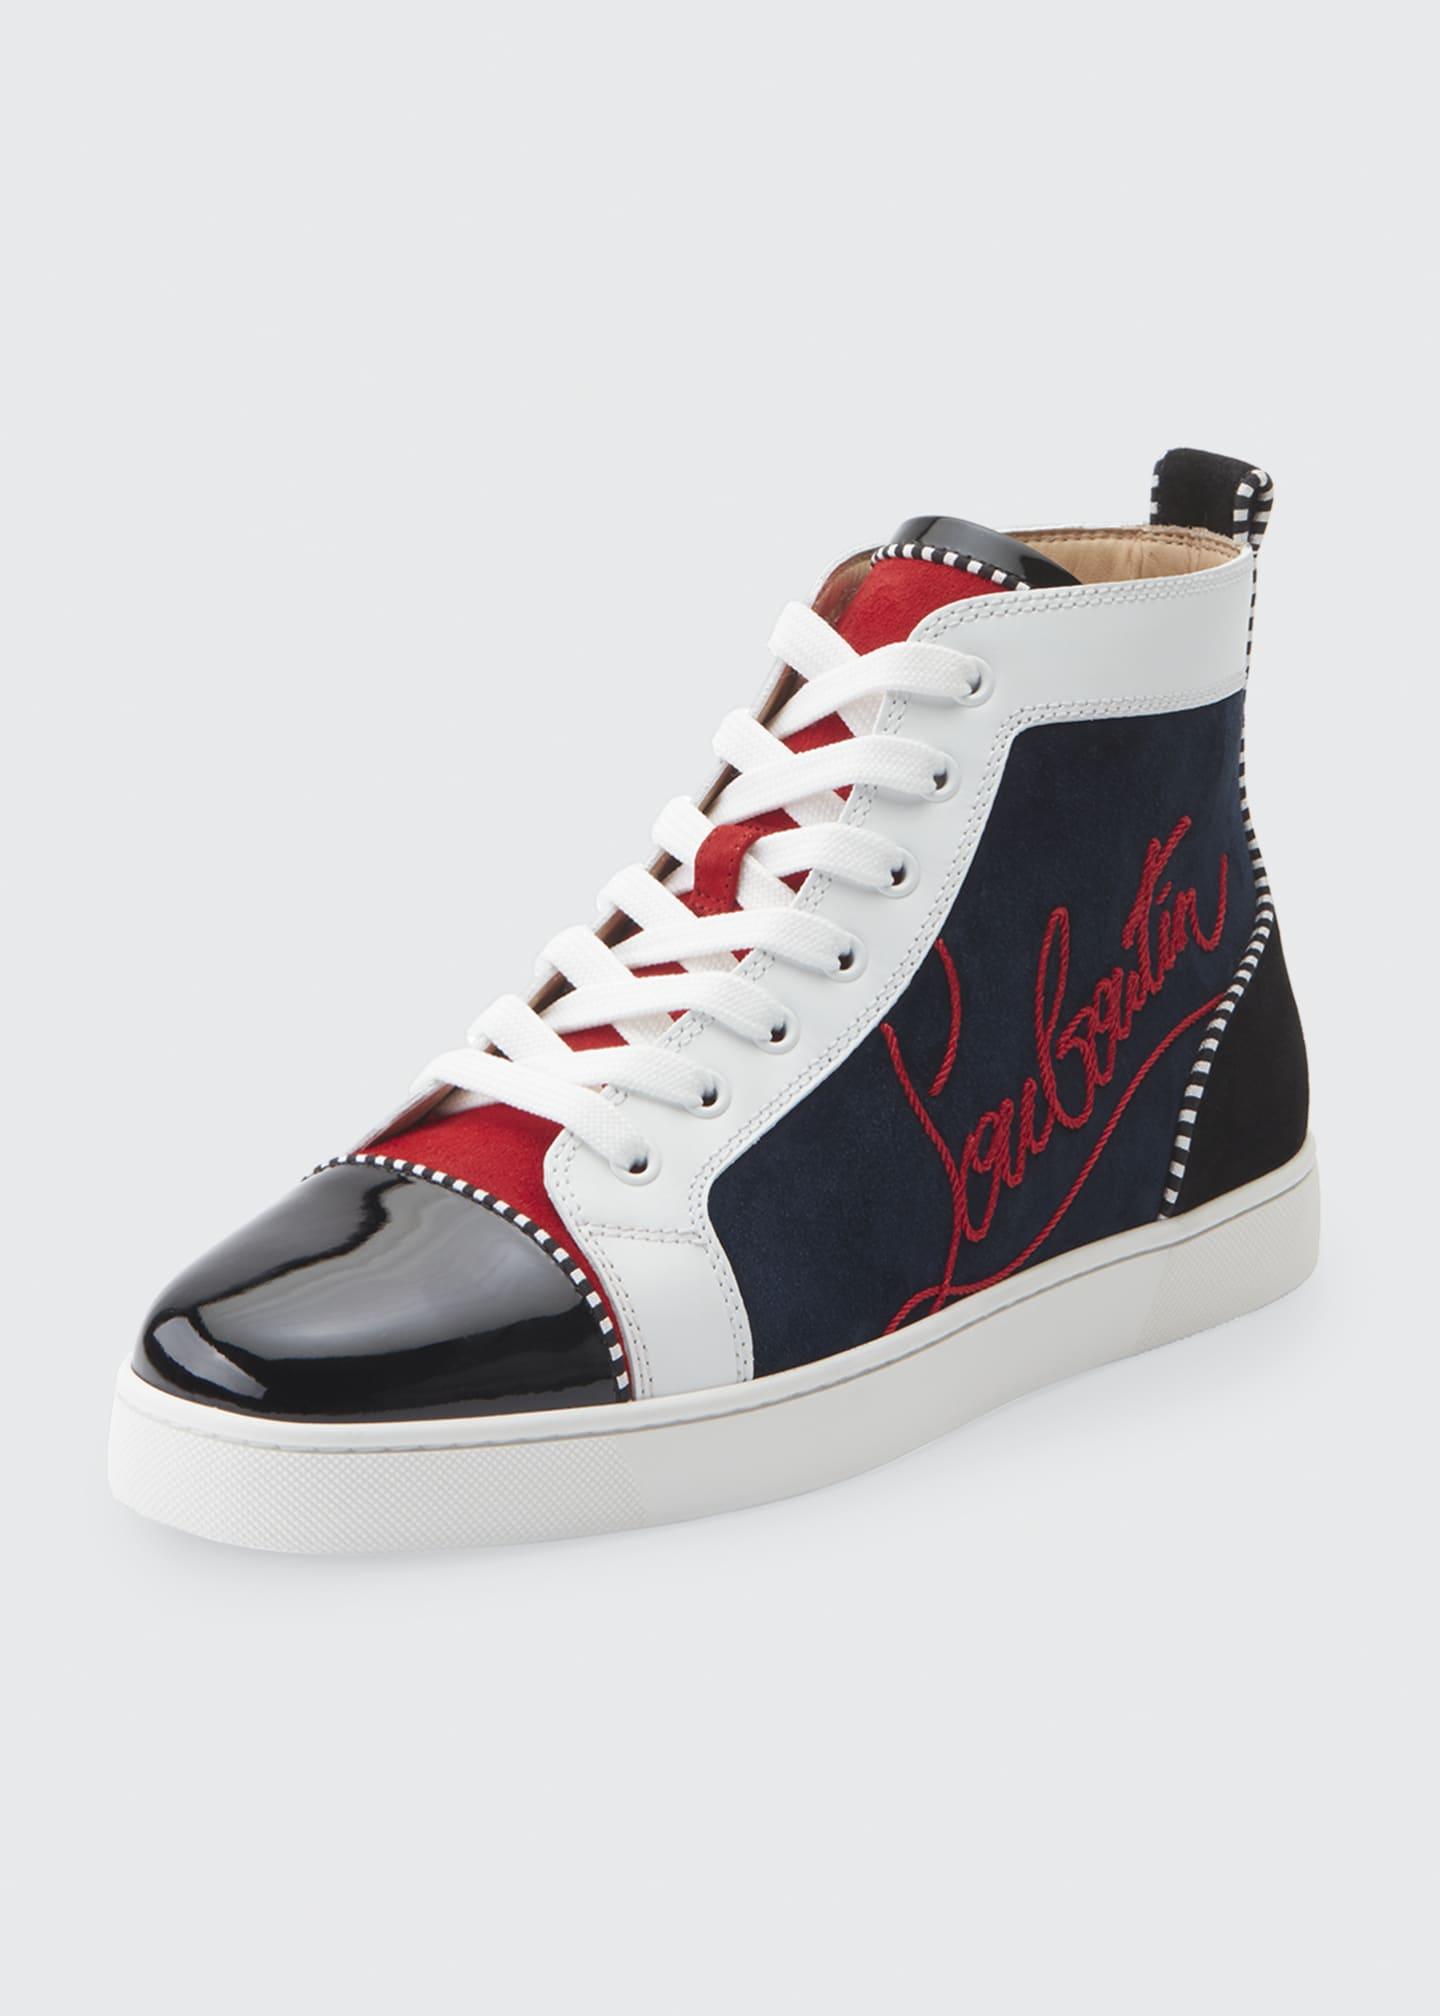 Christian Louboutin Leather Navy Louis Flat Pat/vv/clf/vv brode/gg in ...